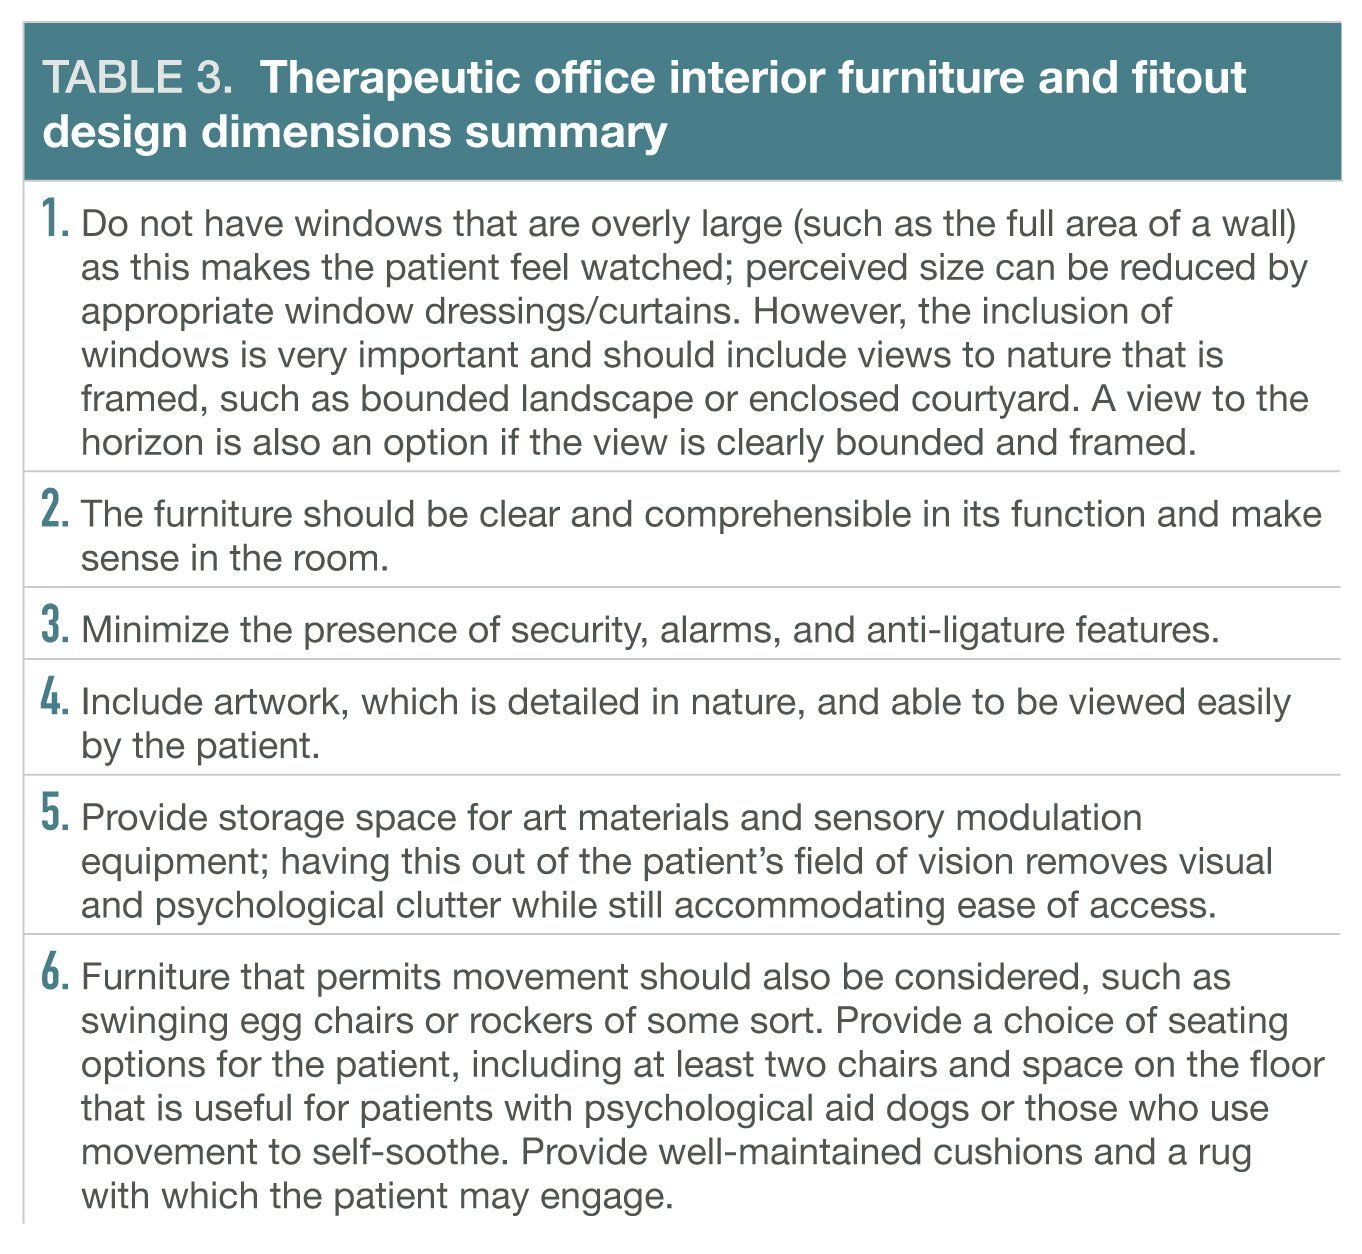 Therapeutic office interior furniture and fitout design dimensions summ